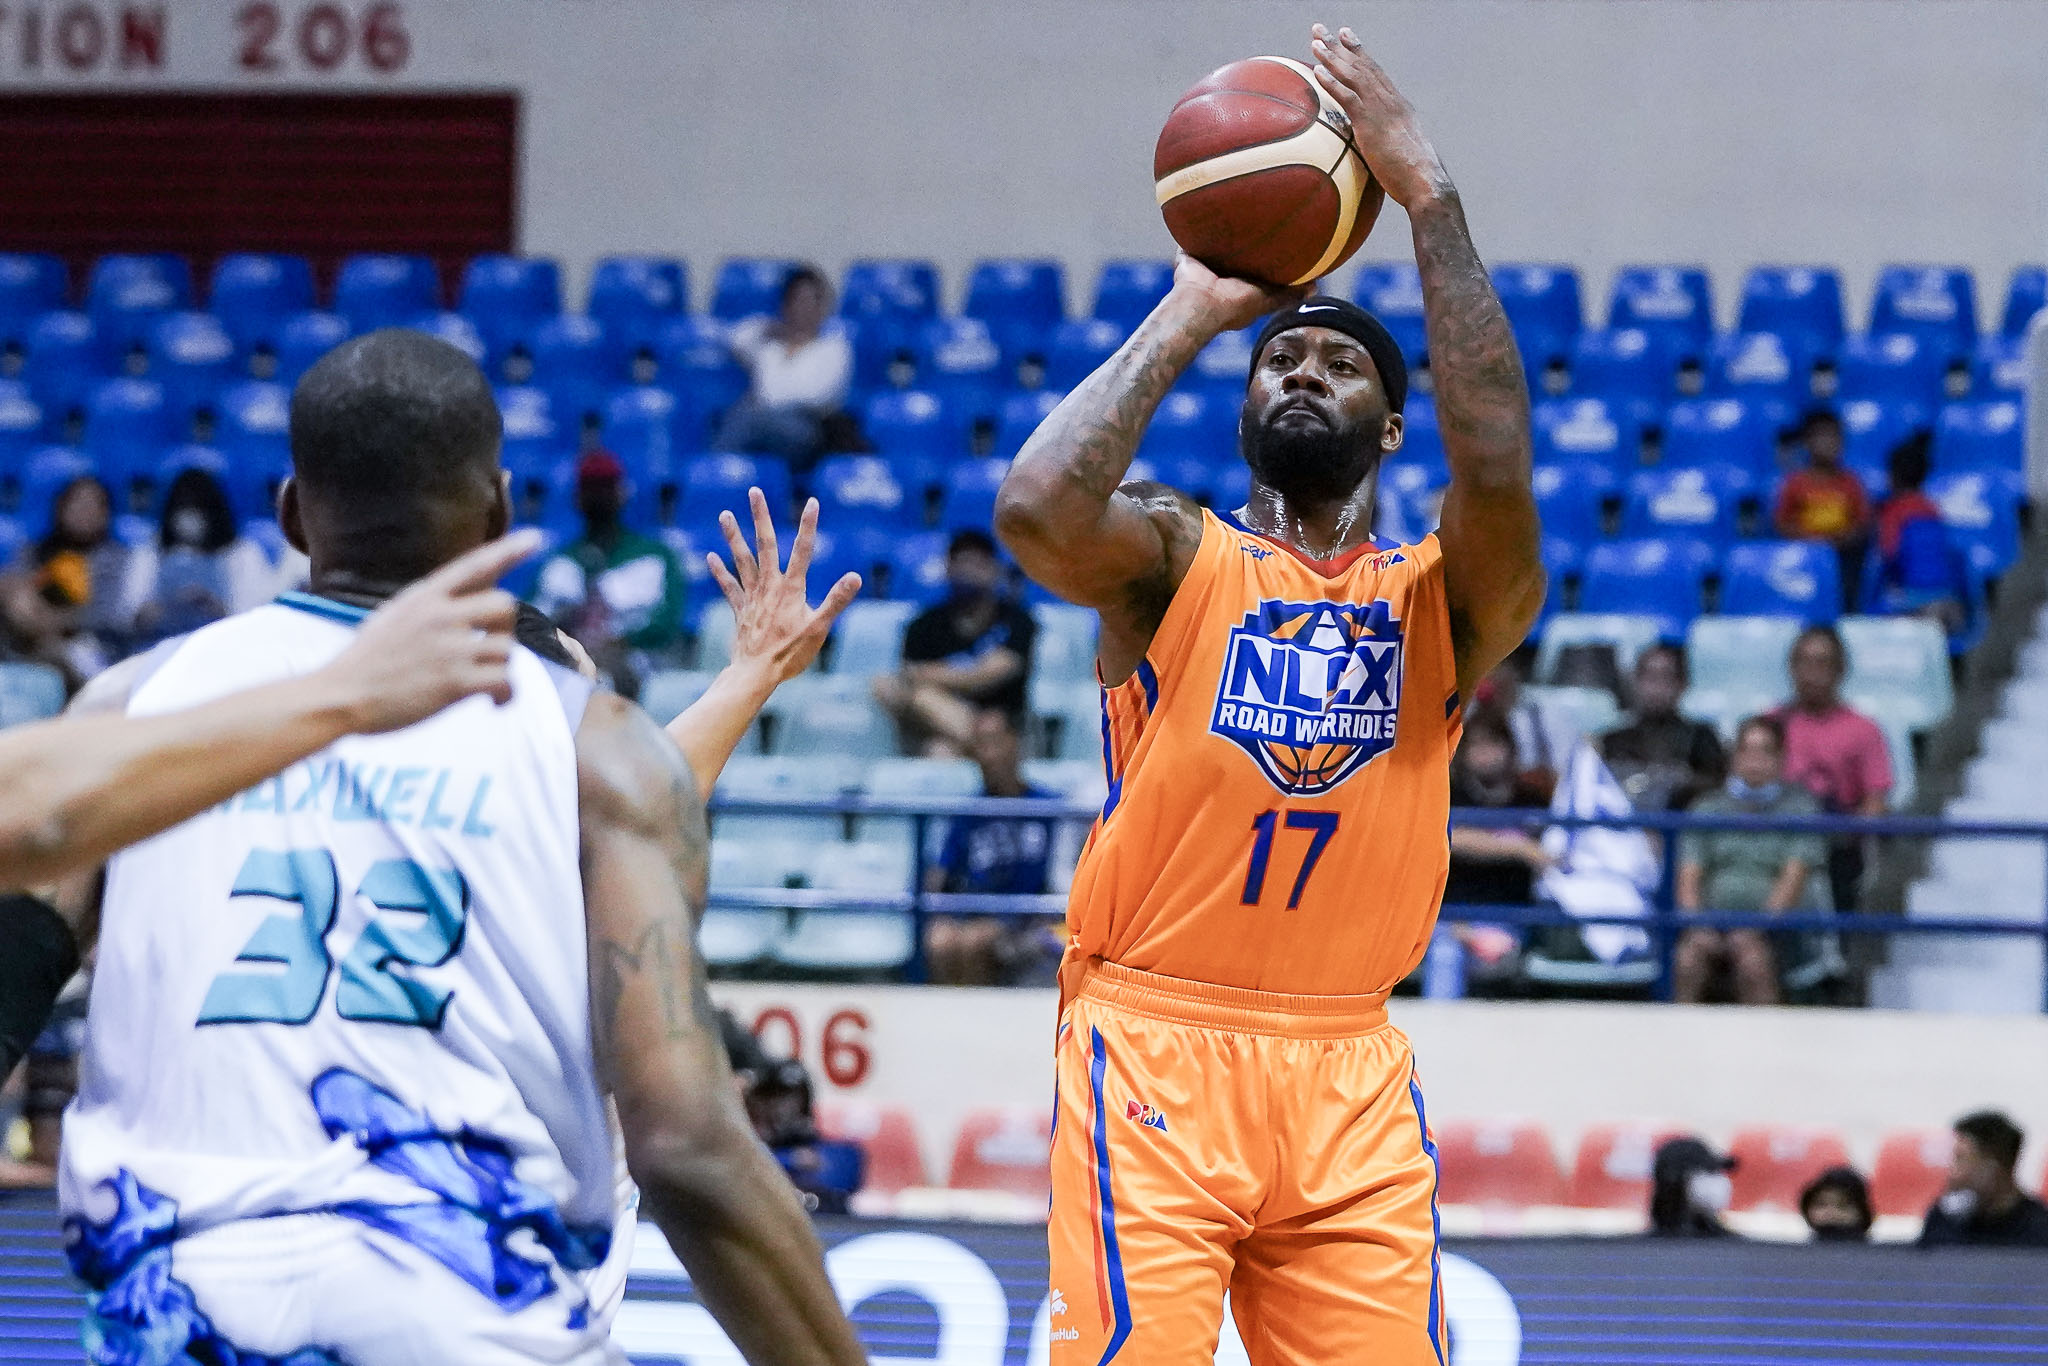 2023-PBA-Governors-Cup-NLEX-vs-Phoenix-Jonathon-Simmons Simmons saddened NLEX stint had to end early, but family comes first Basketball News PBA  - philippine sports news